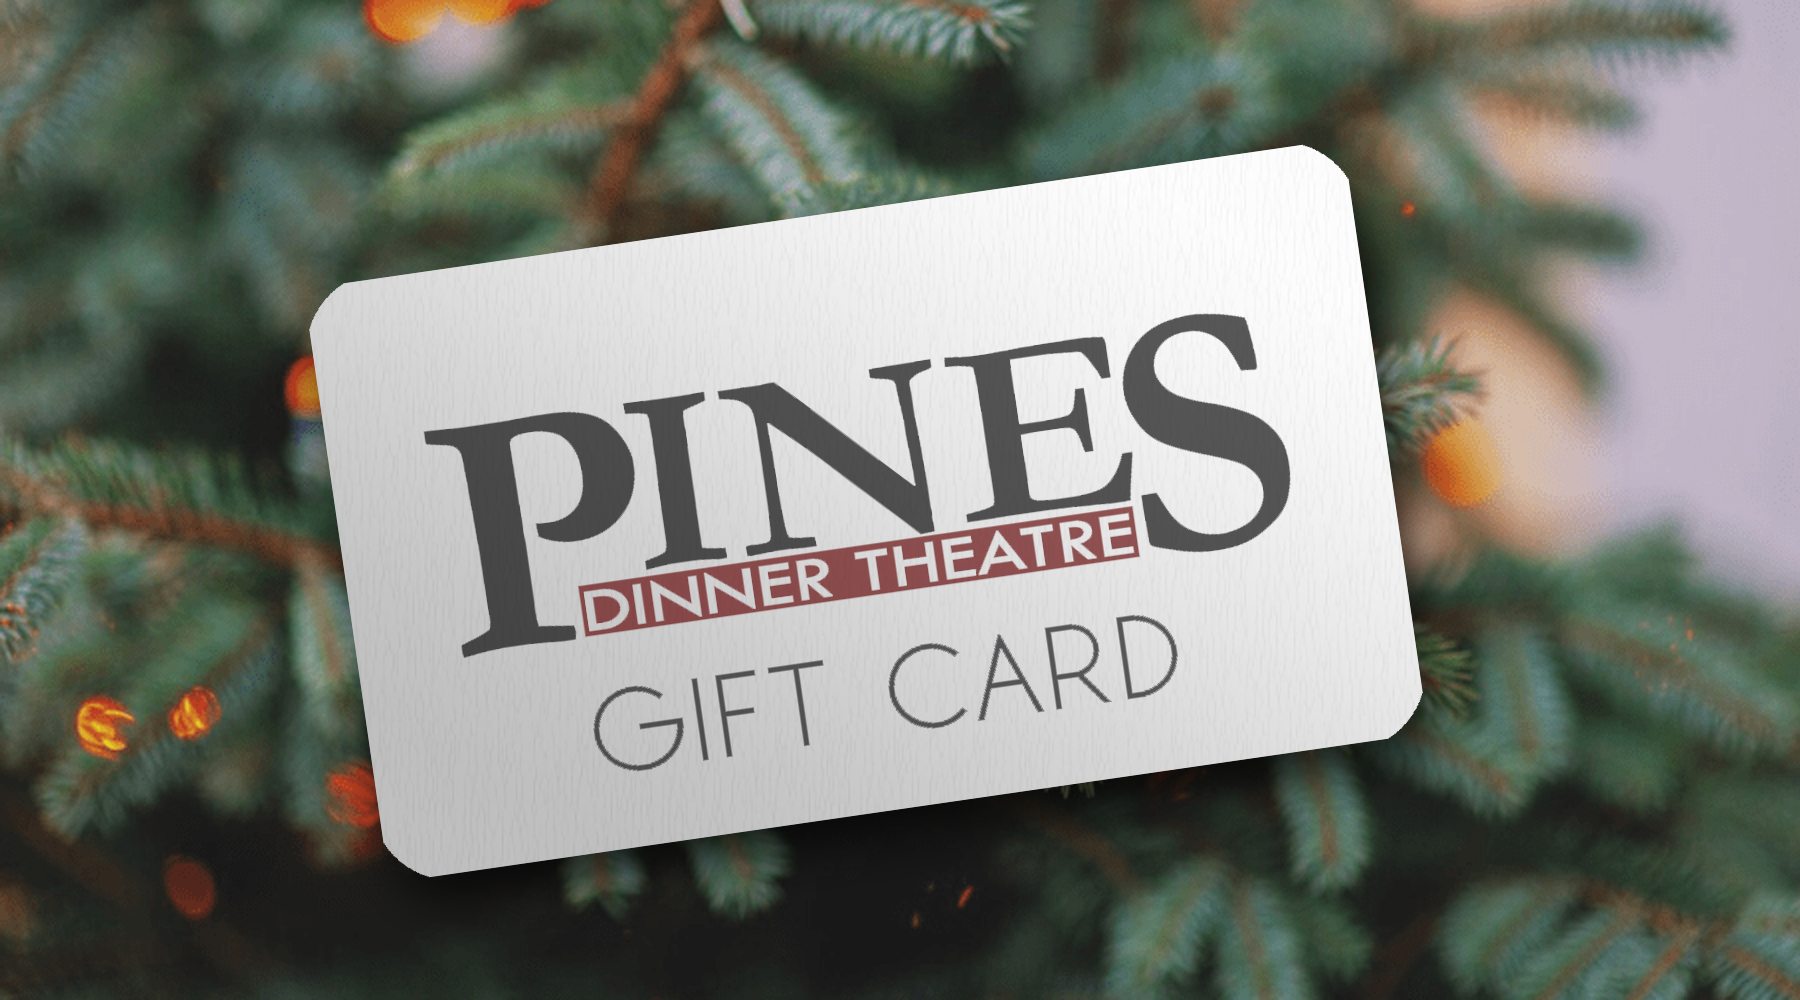 Gift Cards at the Pines Dinner Theatre